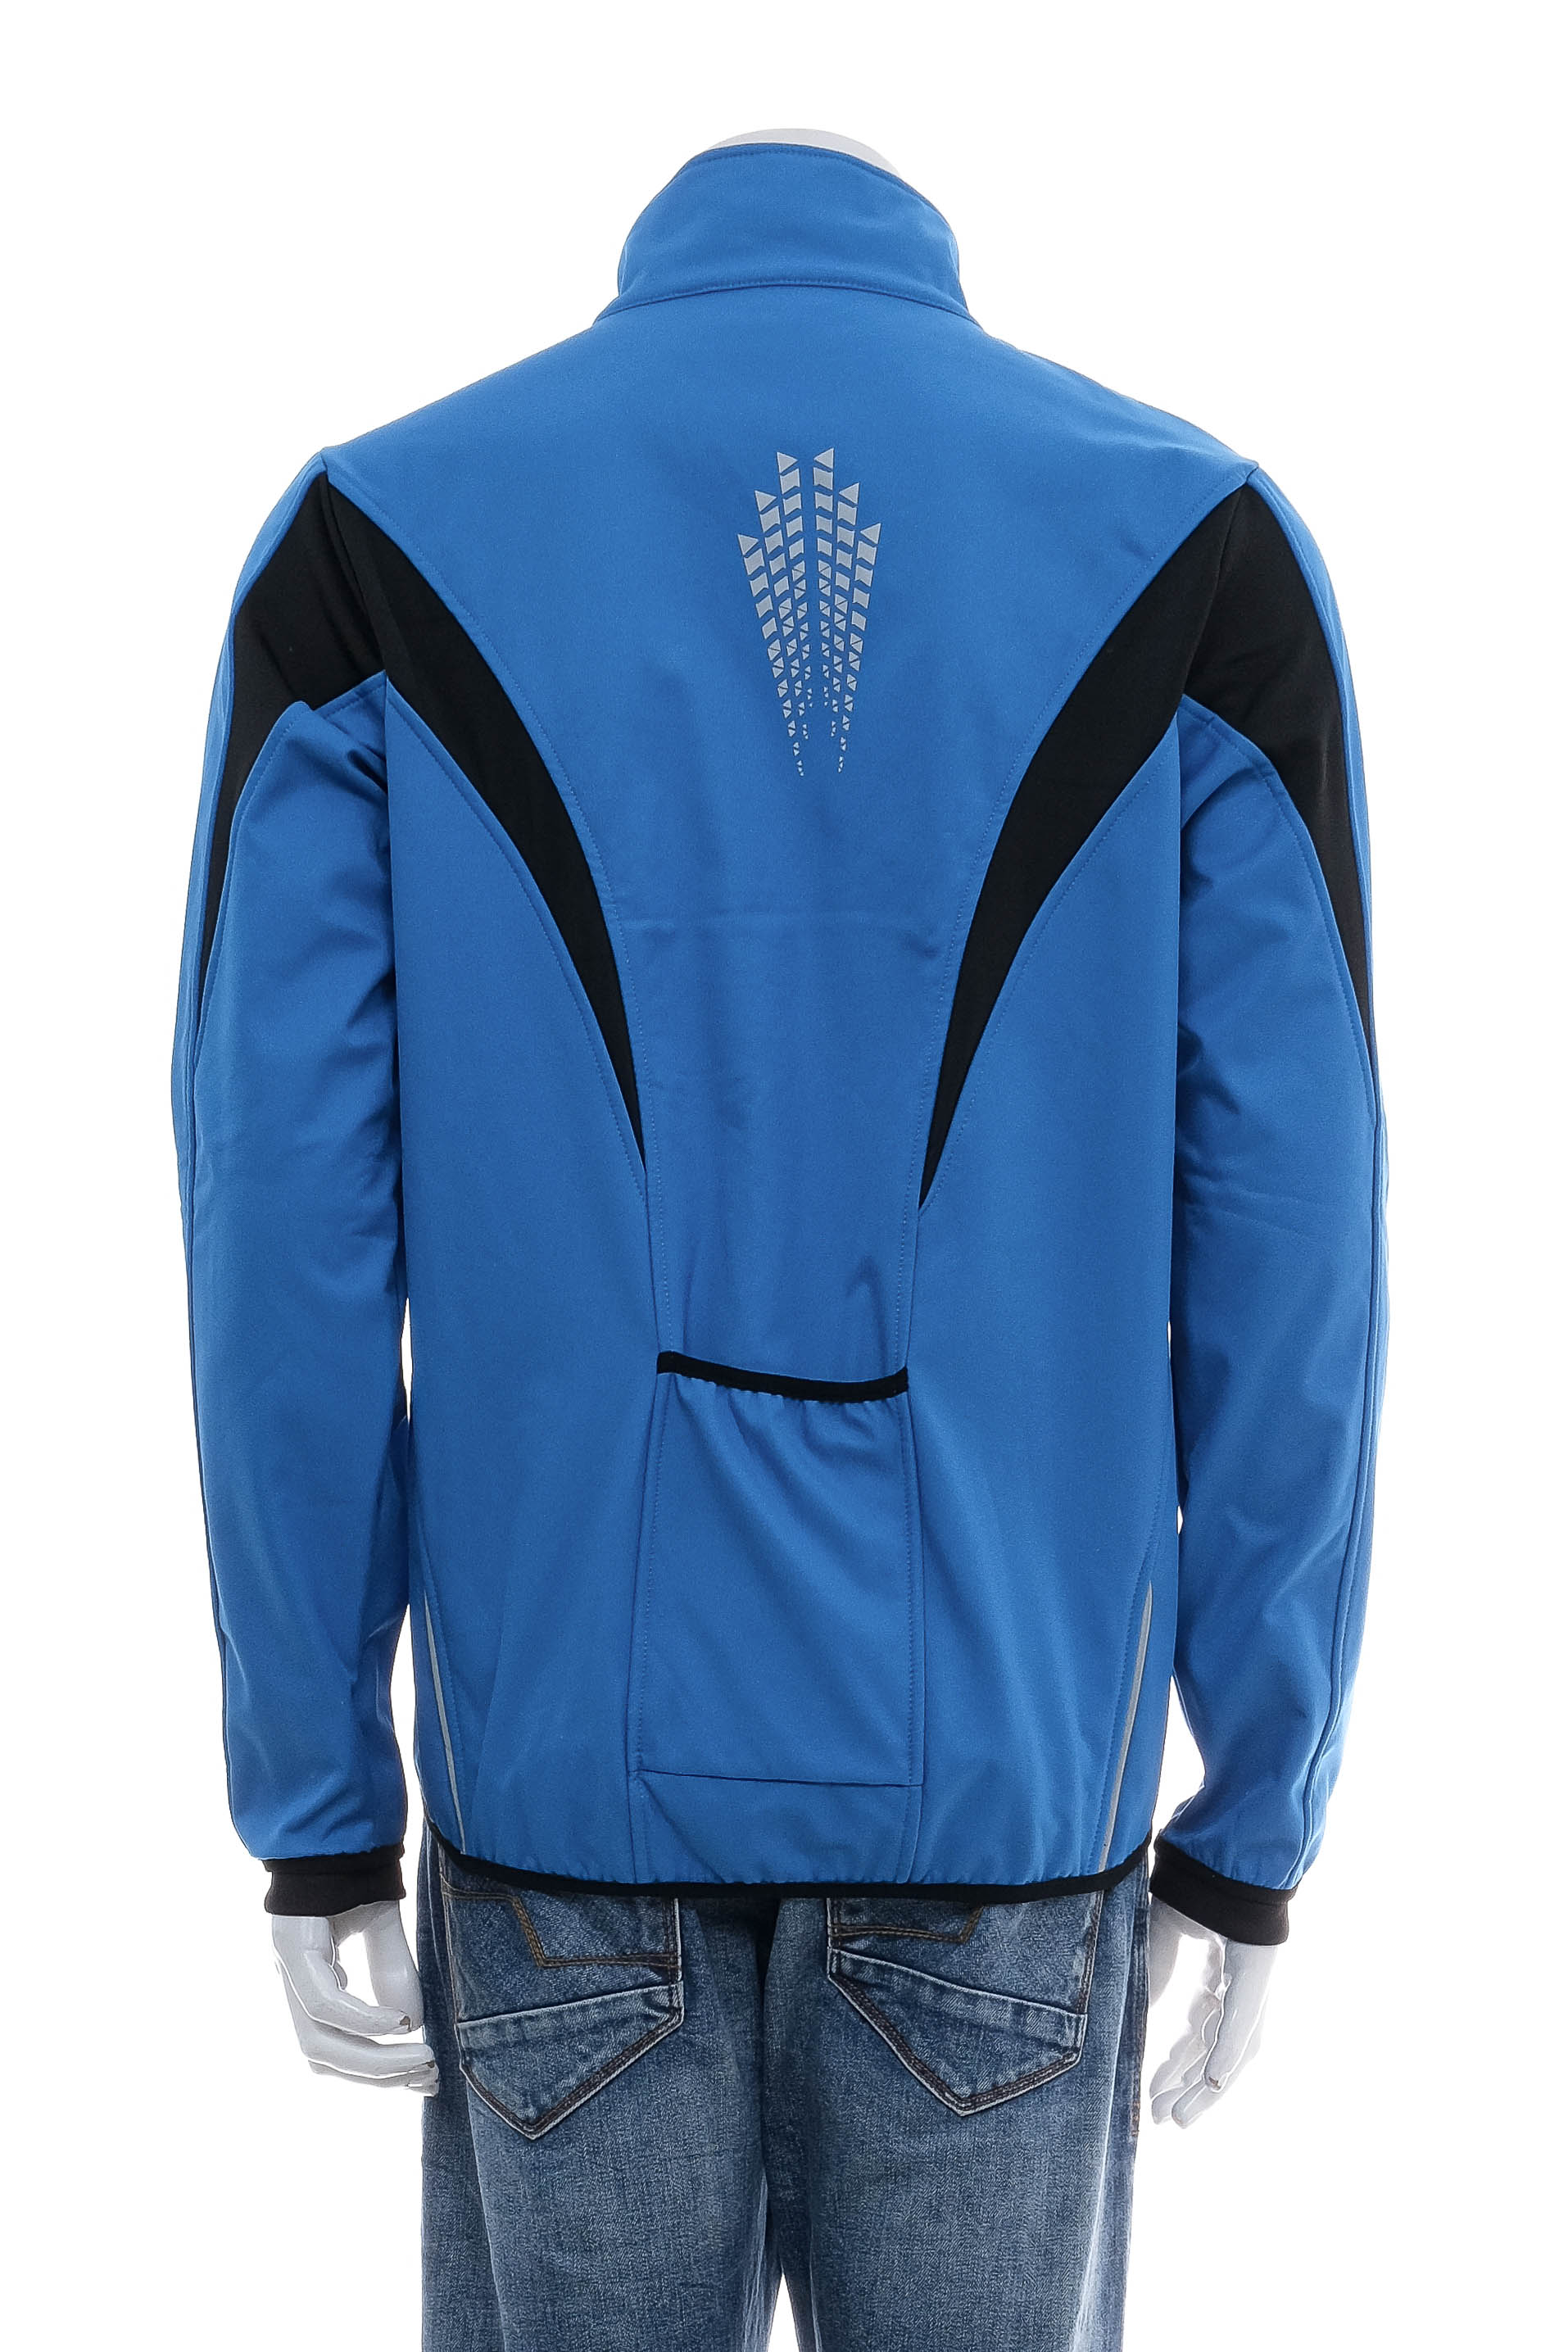 Men's jacket for cycling - ARSUXEO - 1